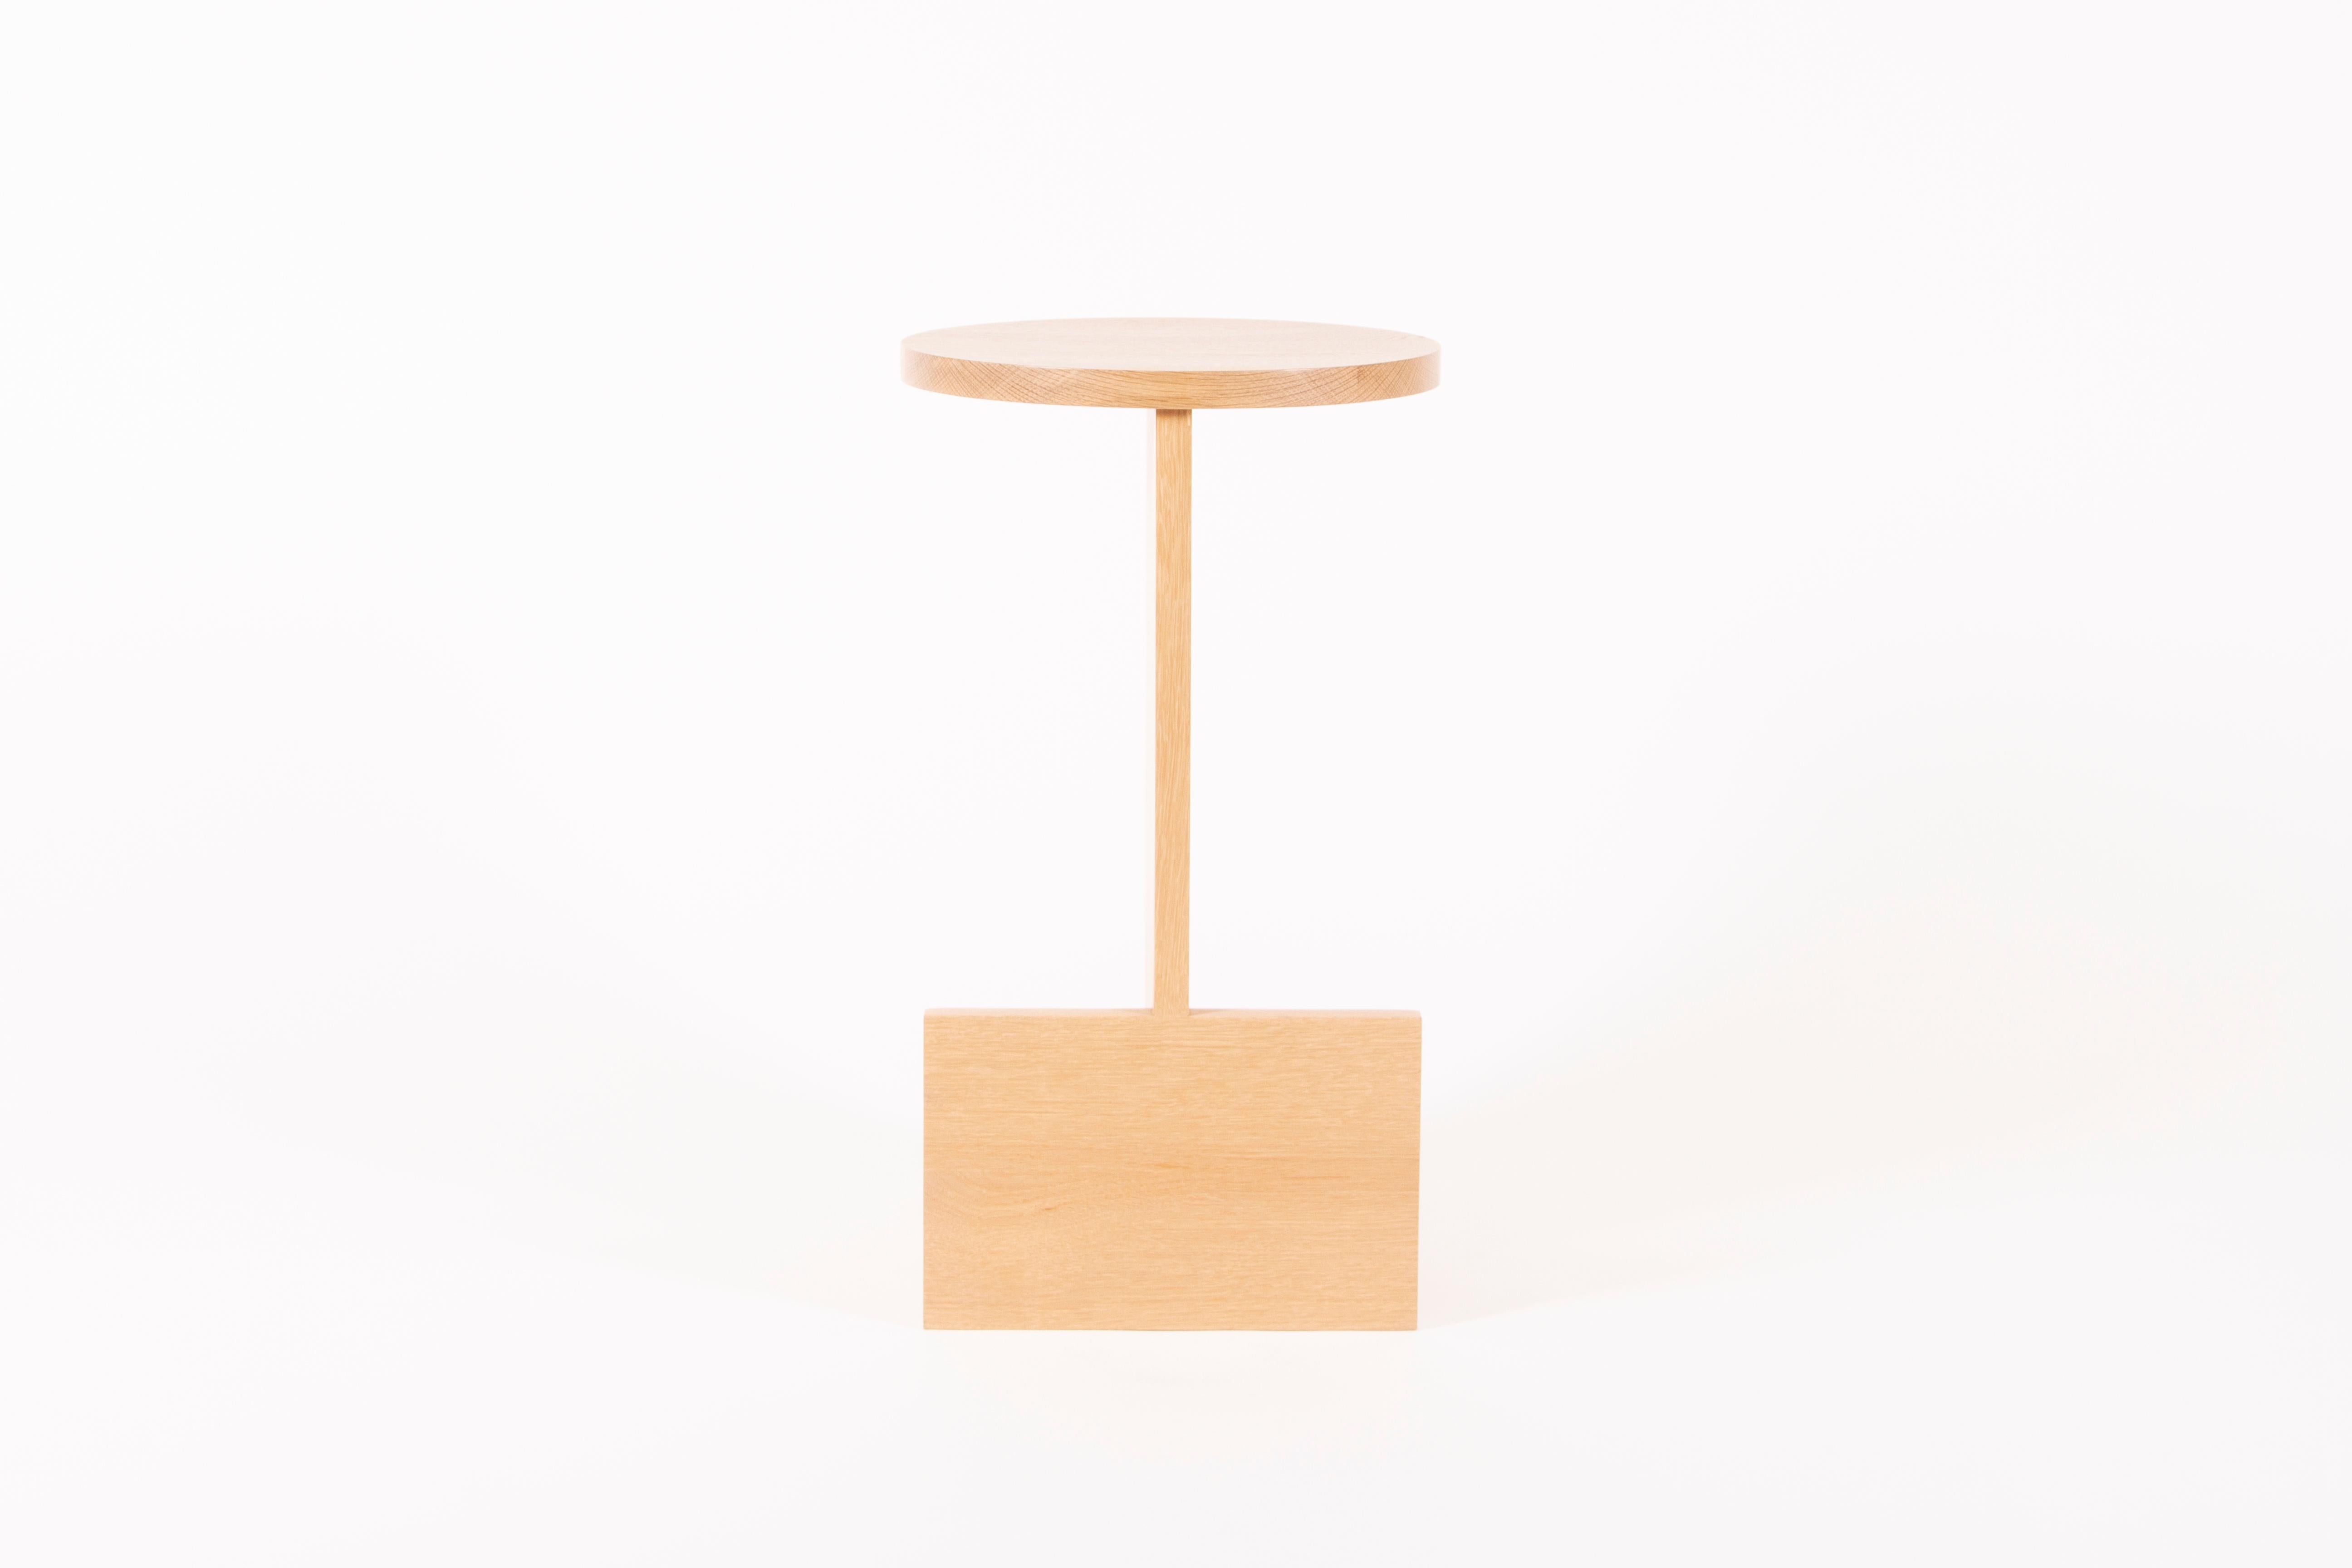 American Counter Stool in Solid White Oak and Brass by Estudio Persona